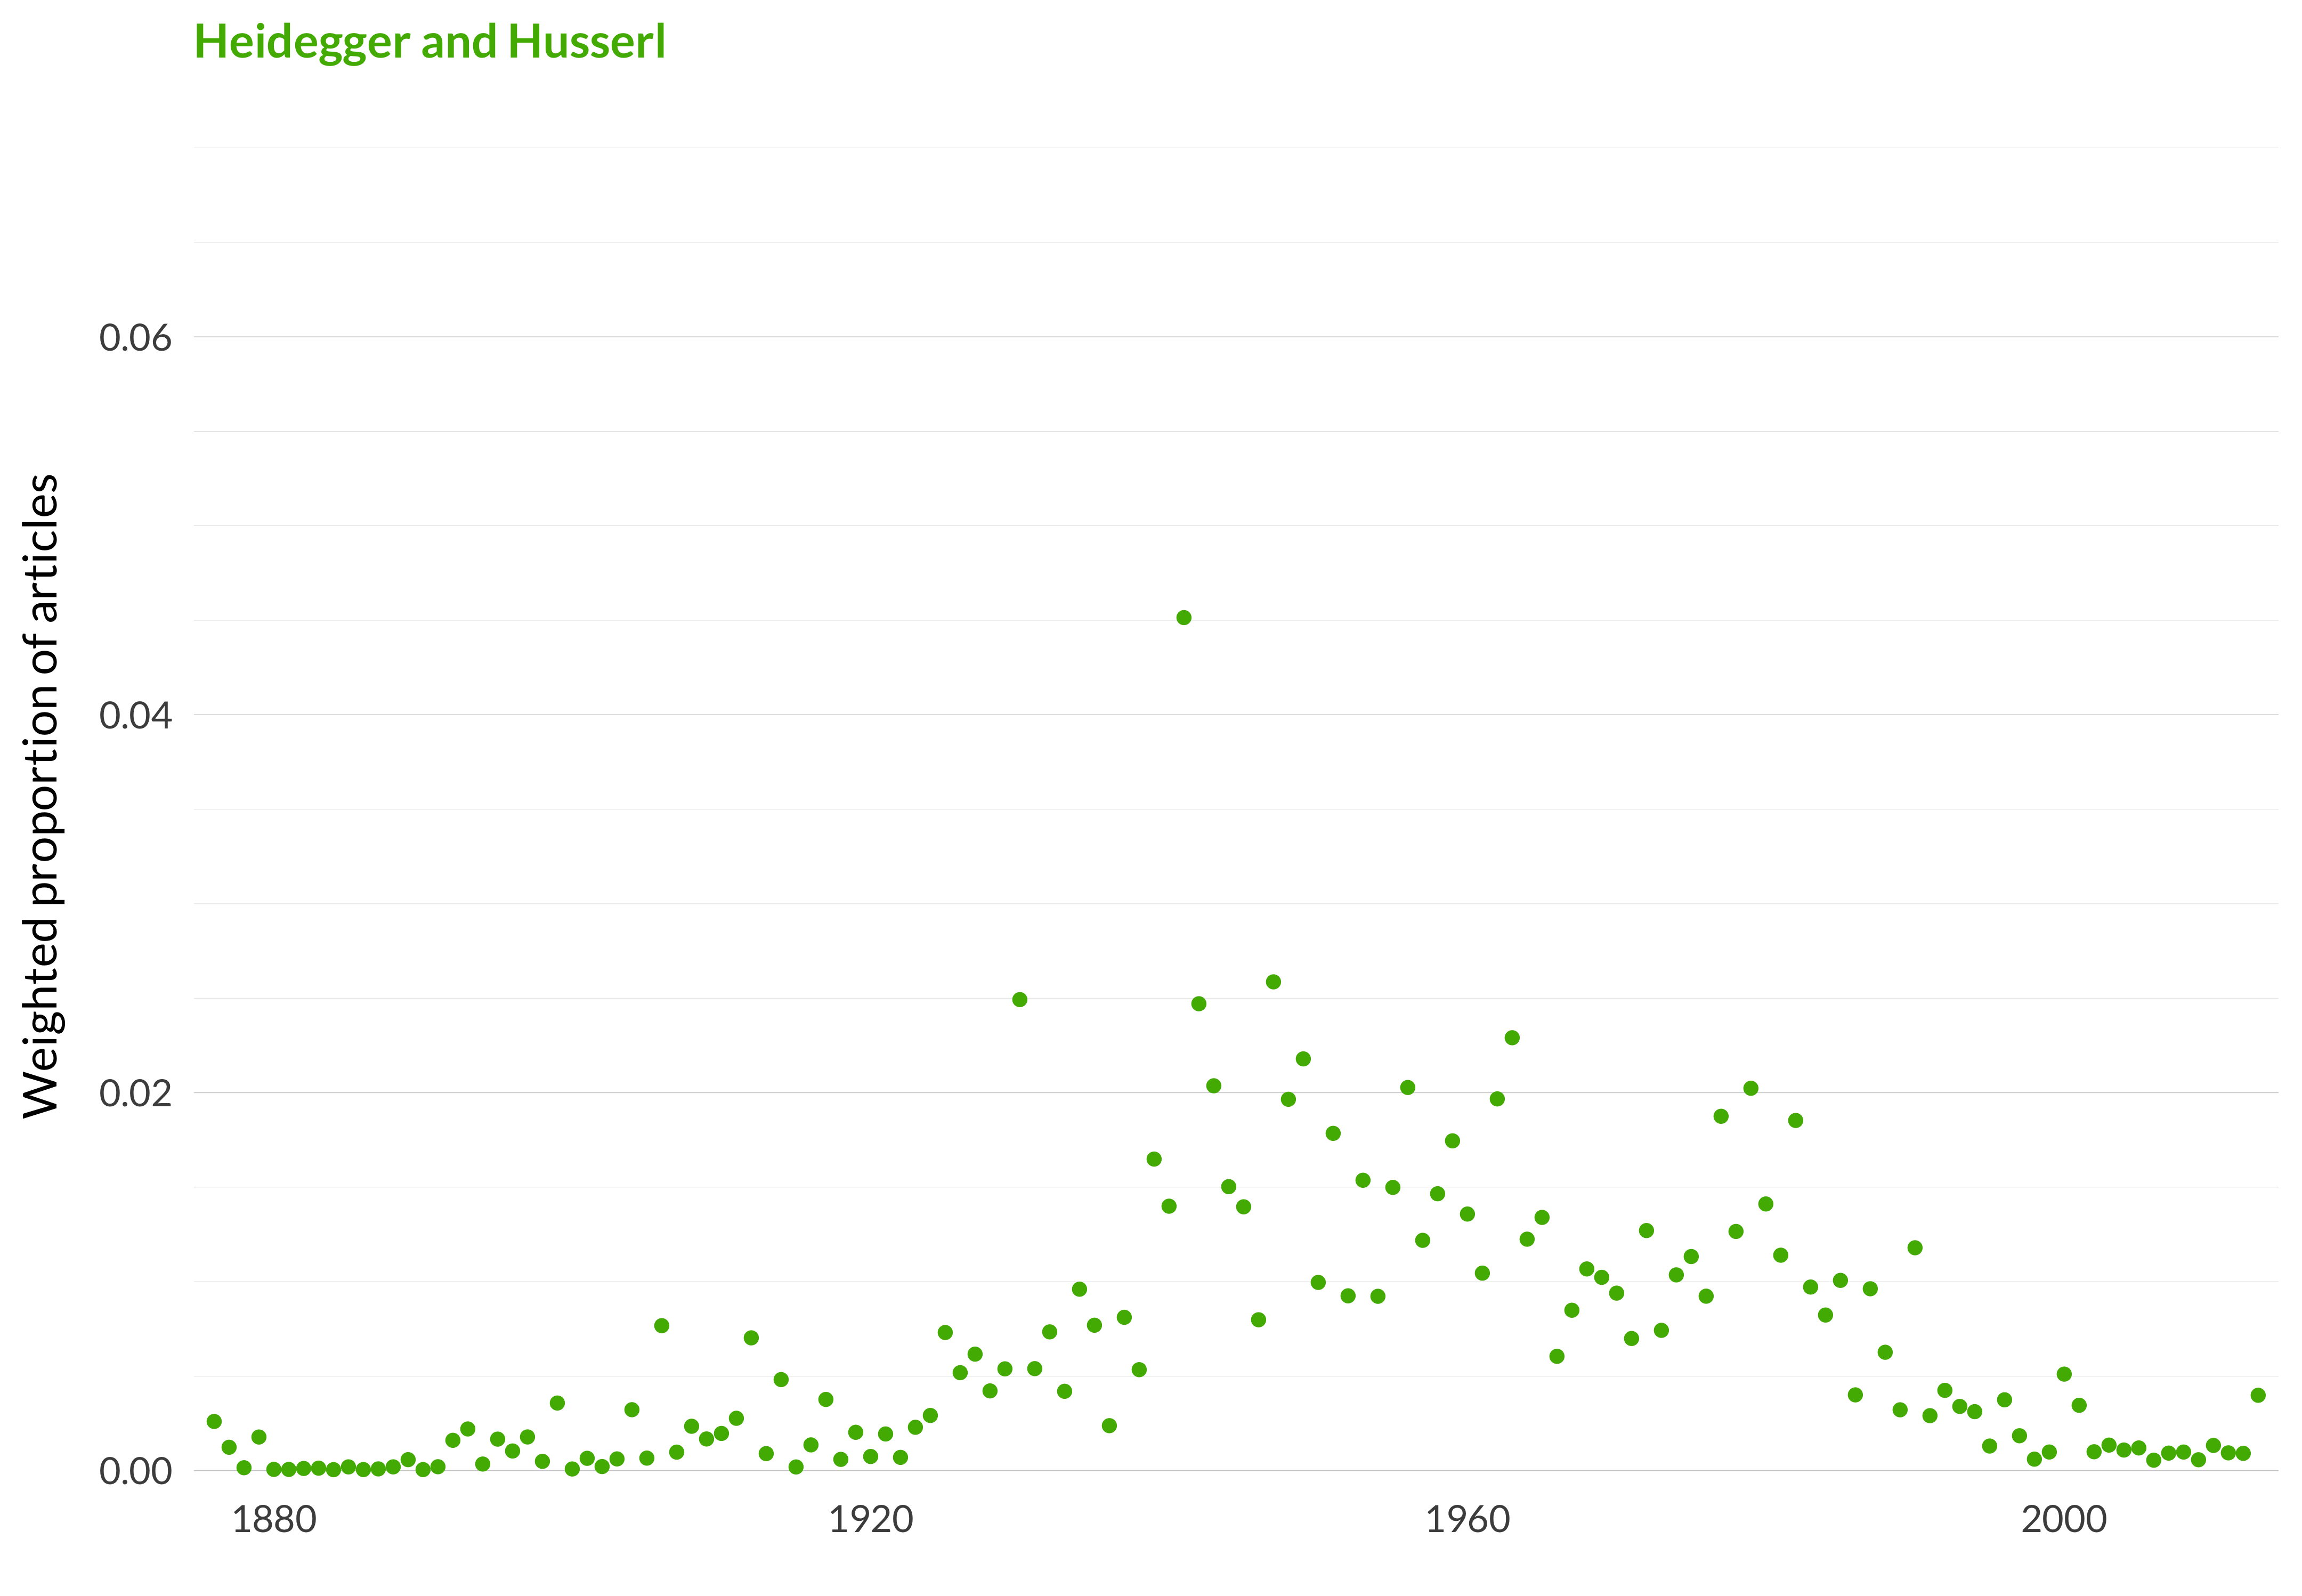 A scatterplot showing which proportion of articles each year are in the Heidegger and Husserltopic. The x-axis shows the year, the y-axis measures the proportion of articles each year in this topic. There is one dot per year. The highest value is in 1941 when 4.5% of articles were in this topic. The lowest value is in 1884 when 0.0% of articles were in this topic. The full table that provides the data for this graph is available in Table A.27 in Appendix A.